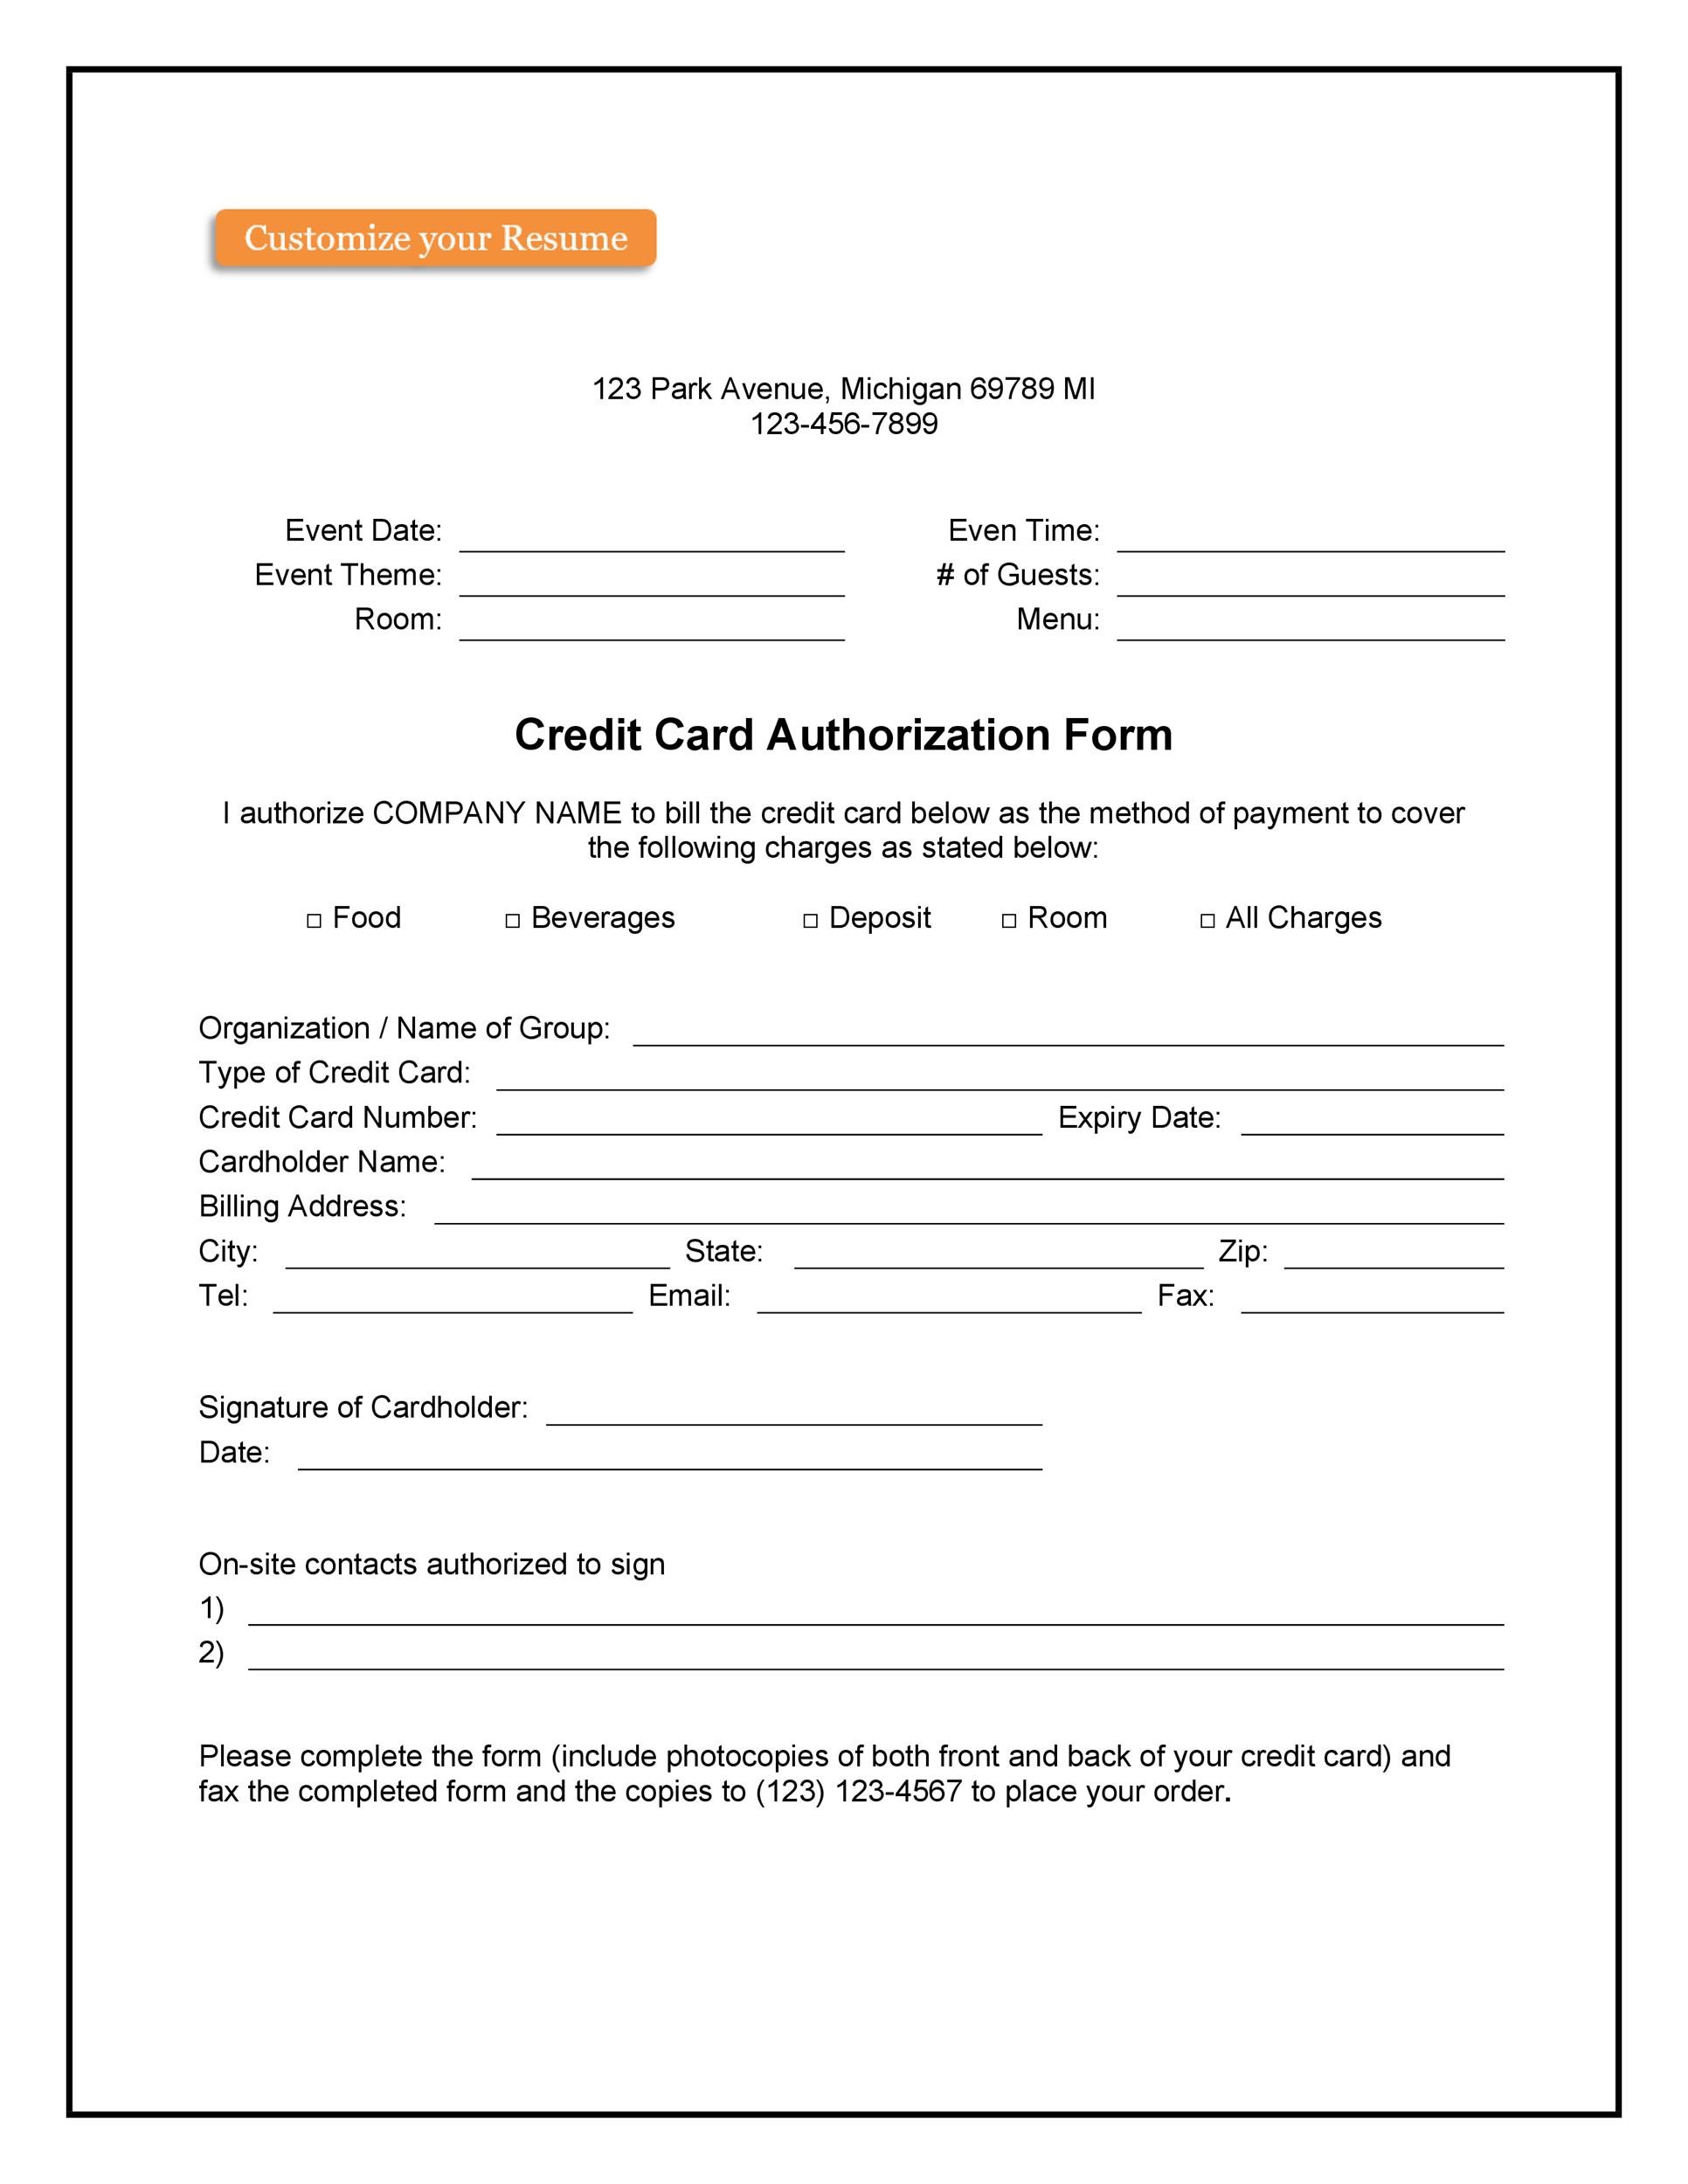 41 Credit Card Authorization Forms Templates Ready To Use 7974